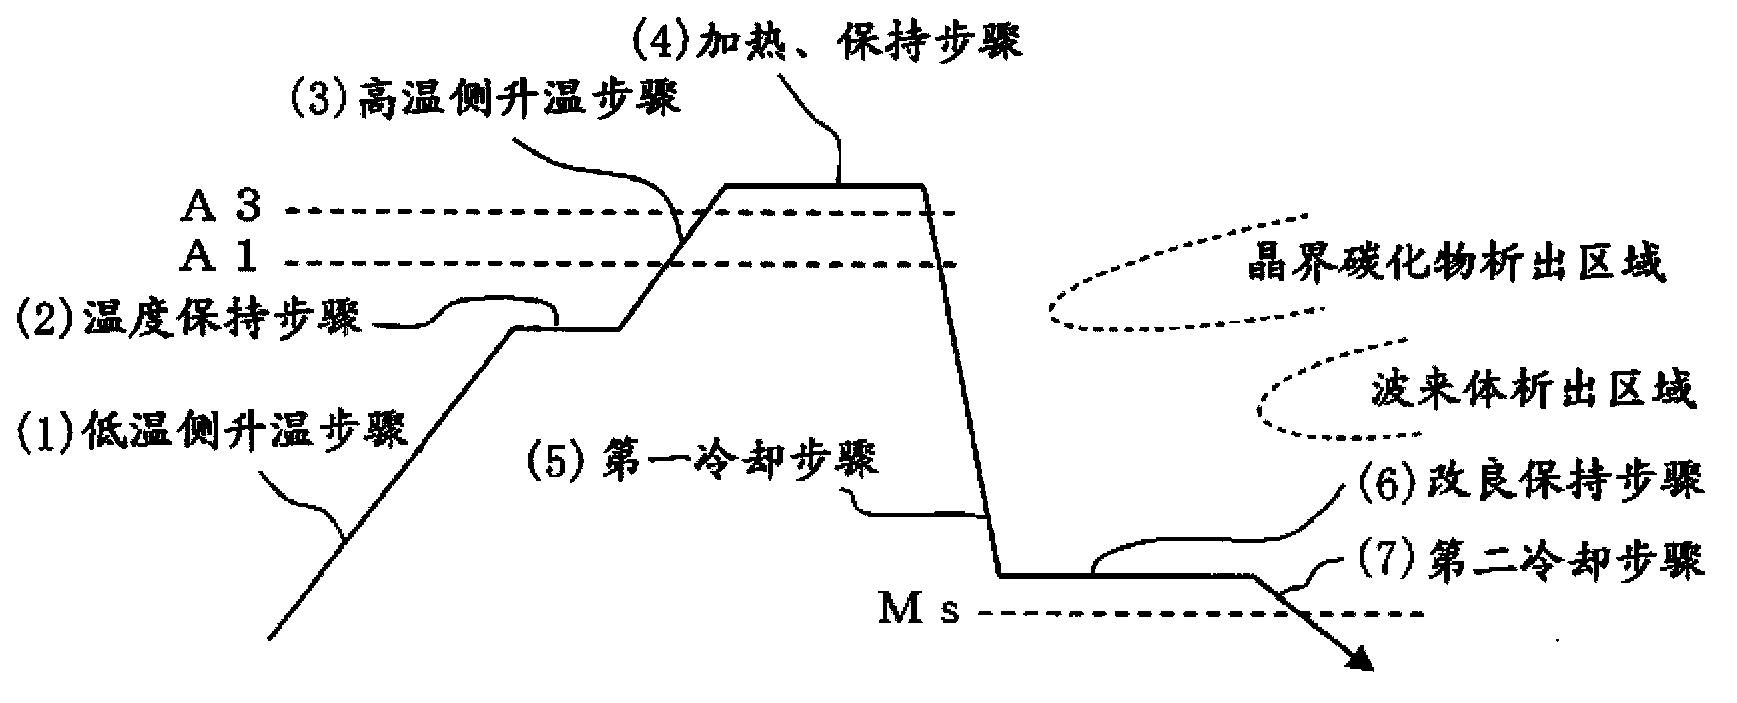 Mold quenching method